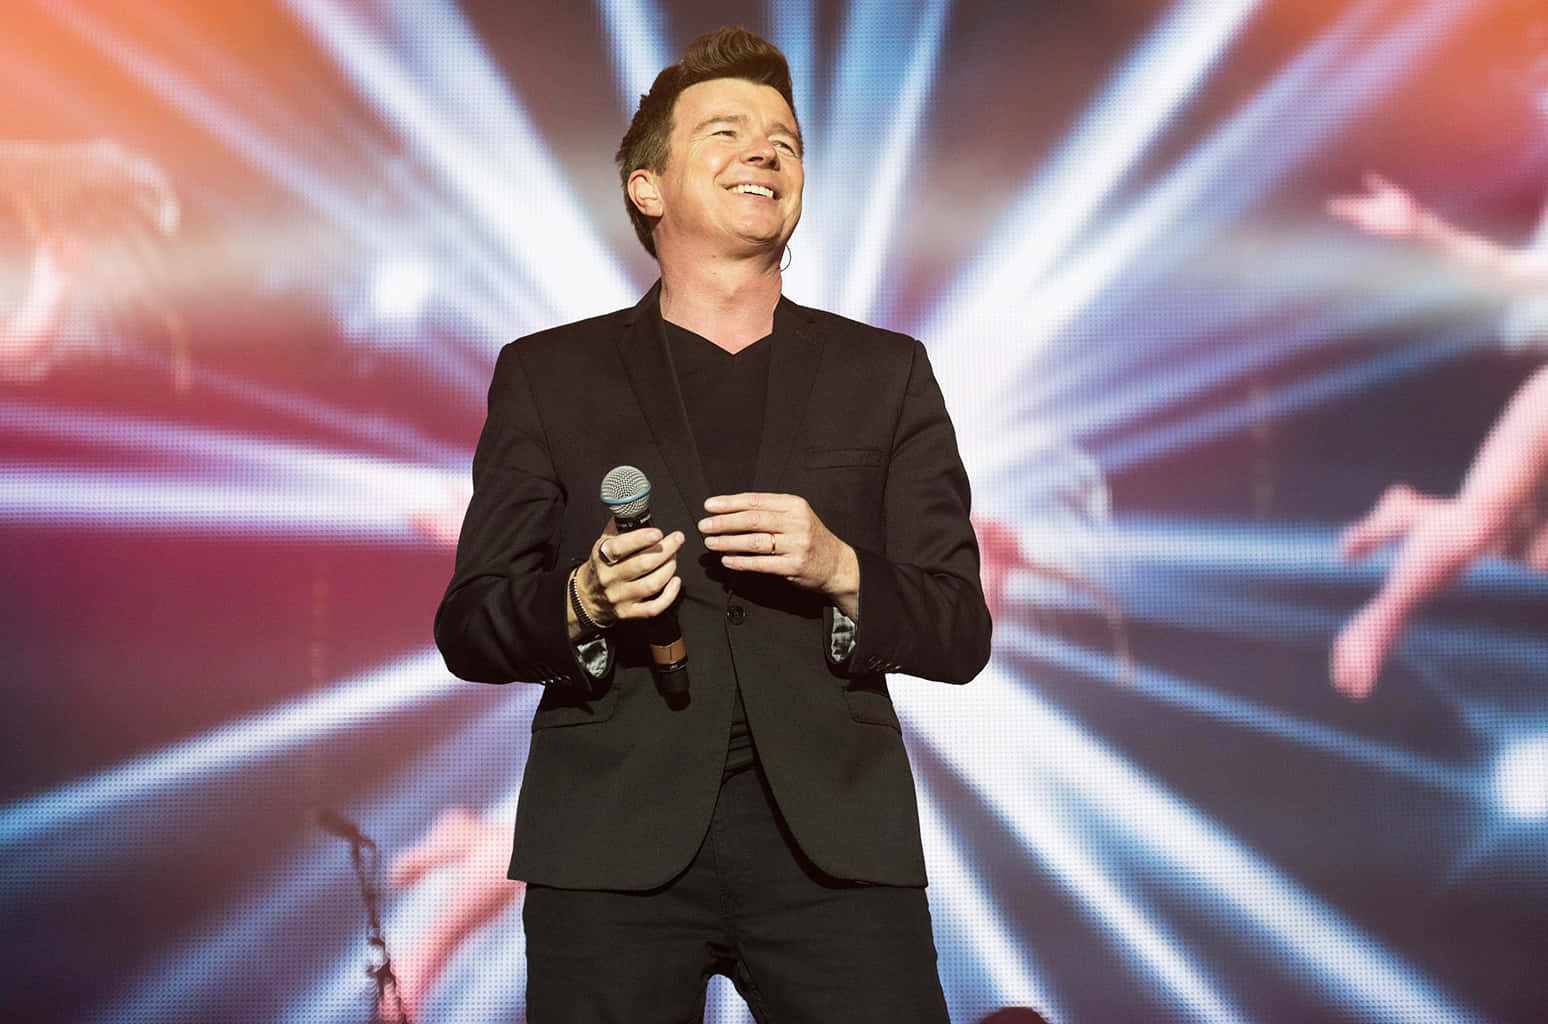 Rick Astley Gets Ready To Perform Wallpaper